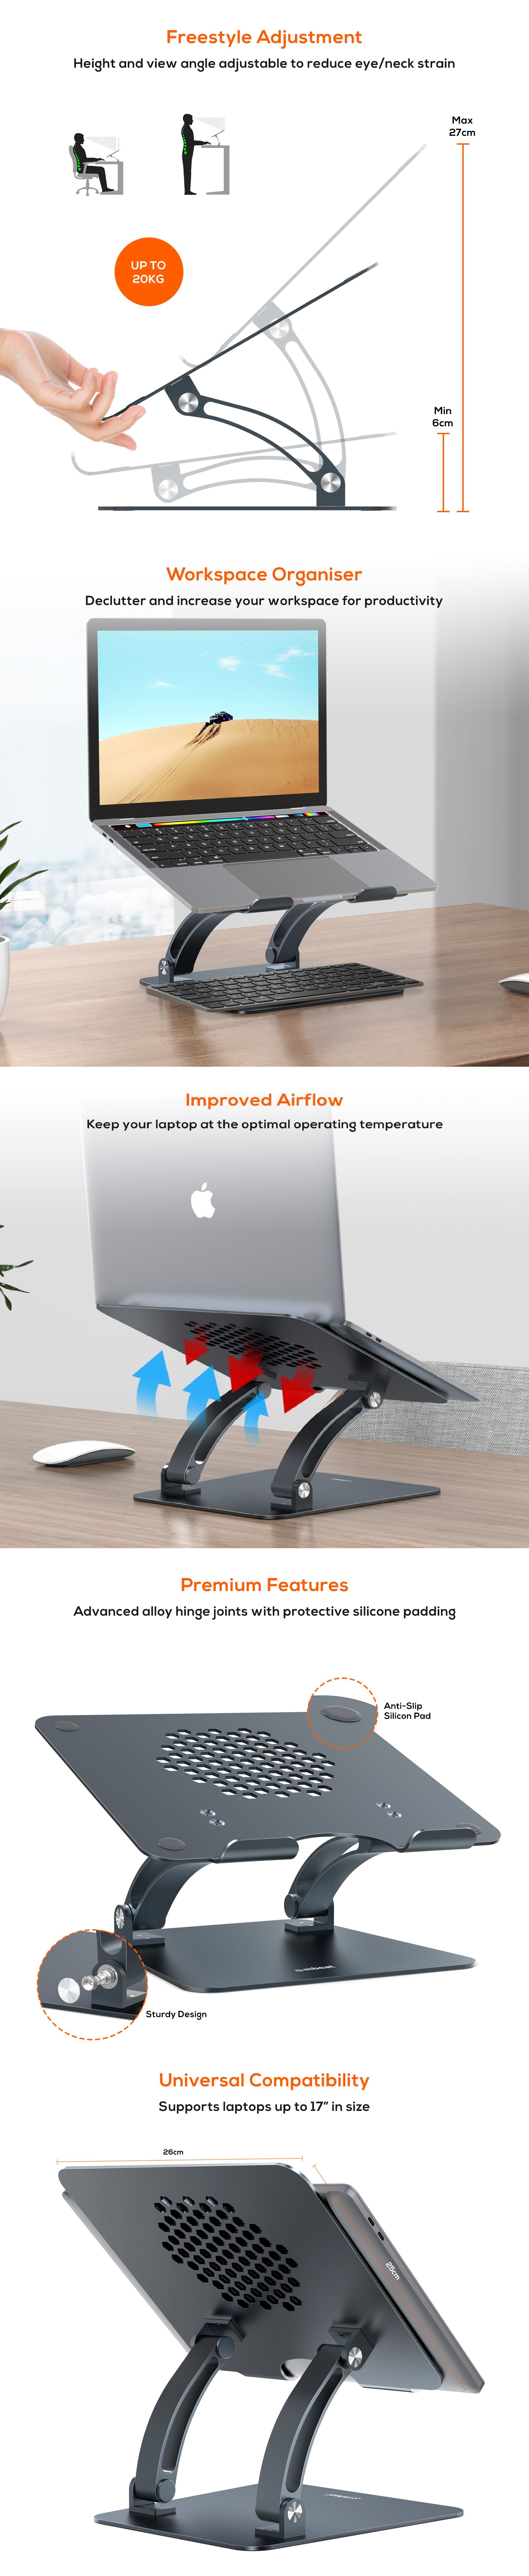 A large marketing image providing additional information about the product mbeat Stage S6 Adjustable Elevated Notebook Stand - Additional alt info not provided